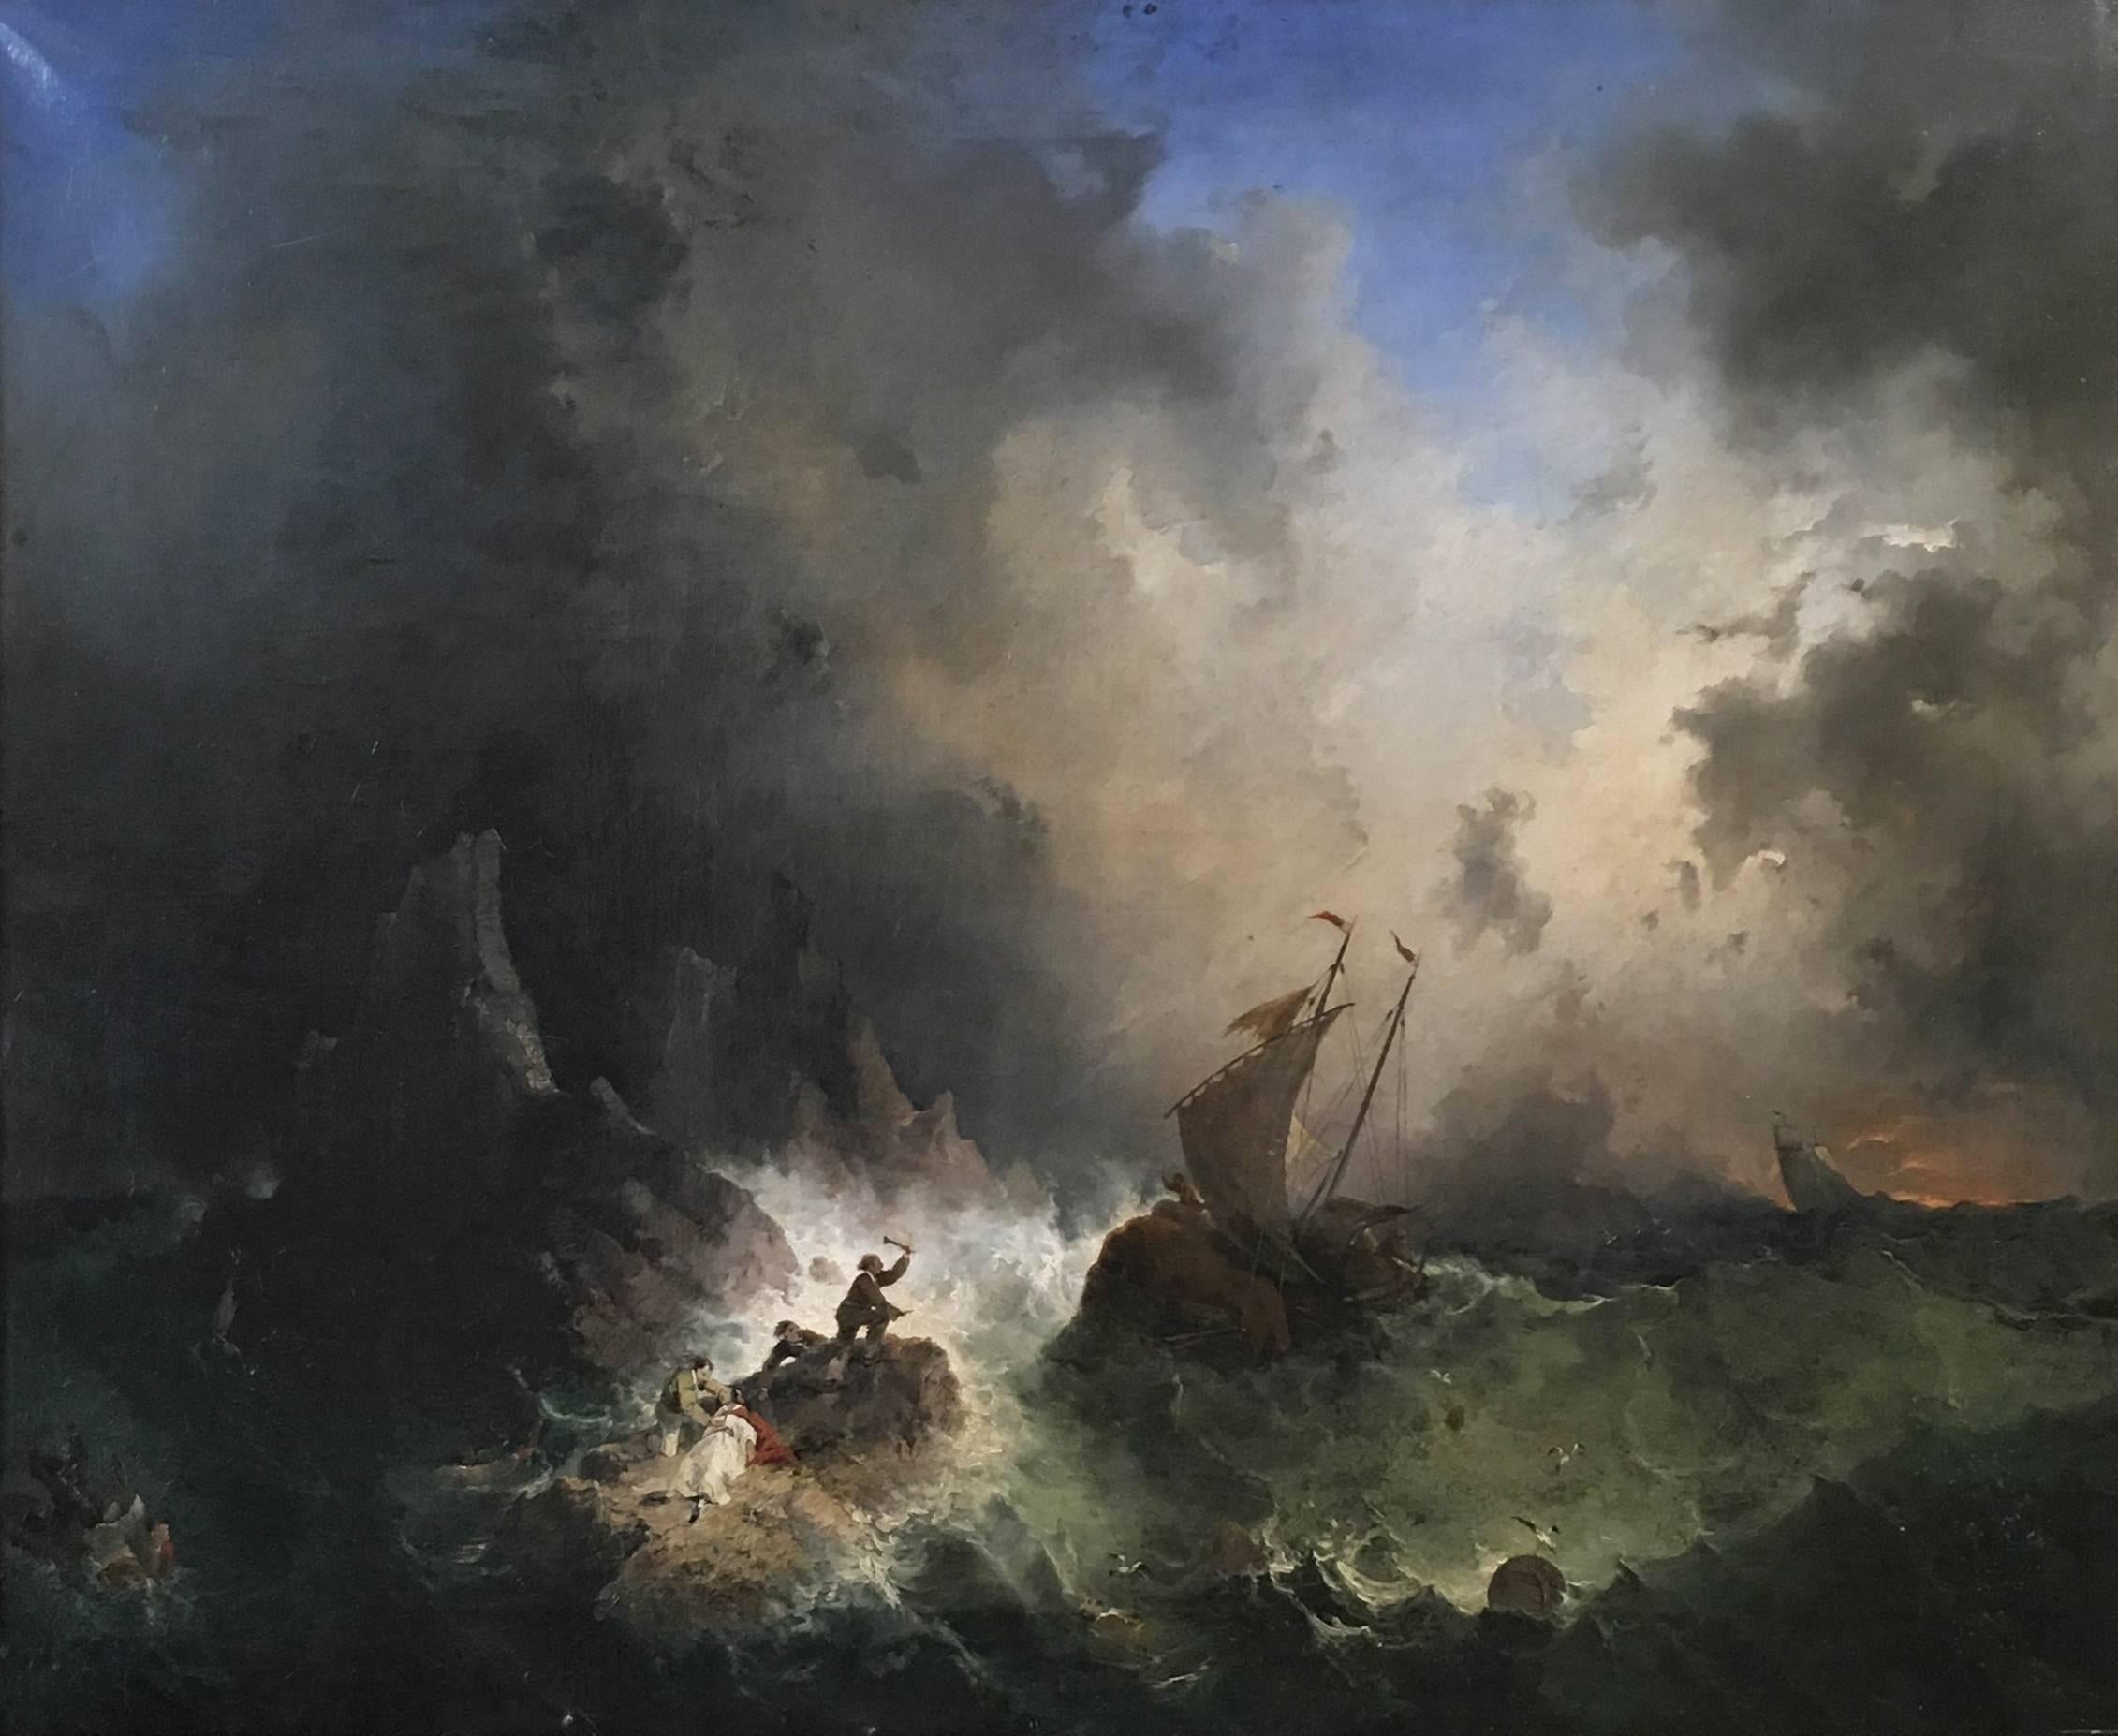 Painting by unknown artist.
Oil on canvas in giltwood frame. 
Painting depicting the tragic scene of a shipwreck.
French school, mid-19th century.